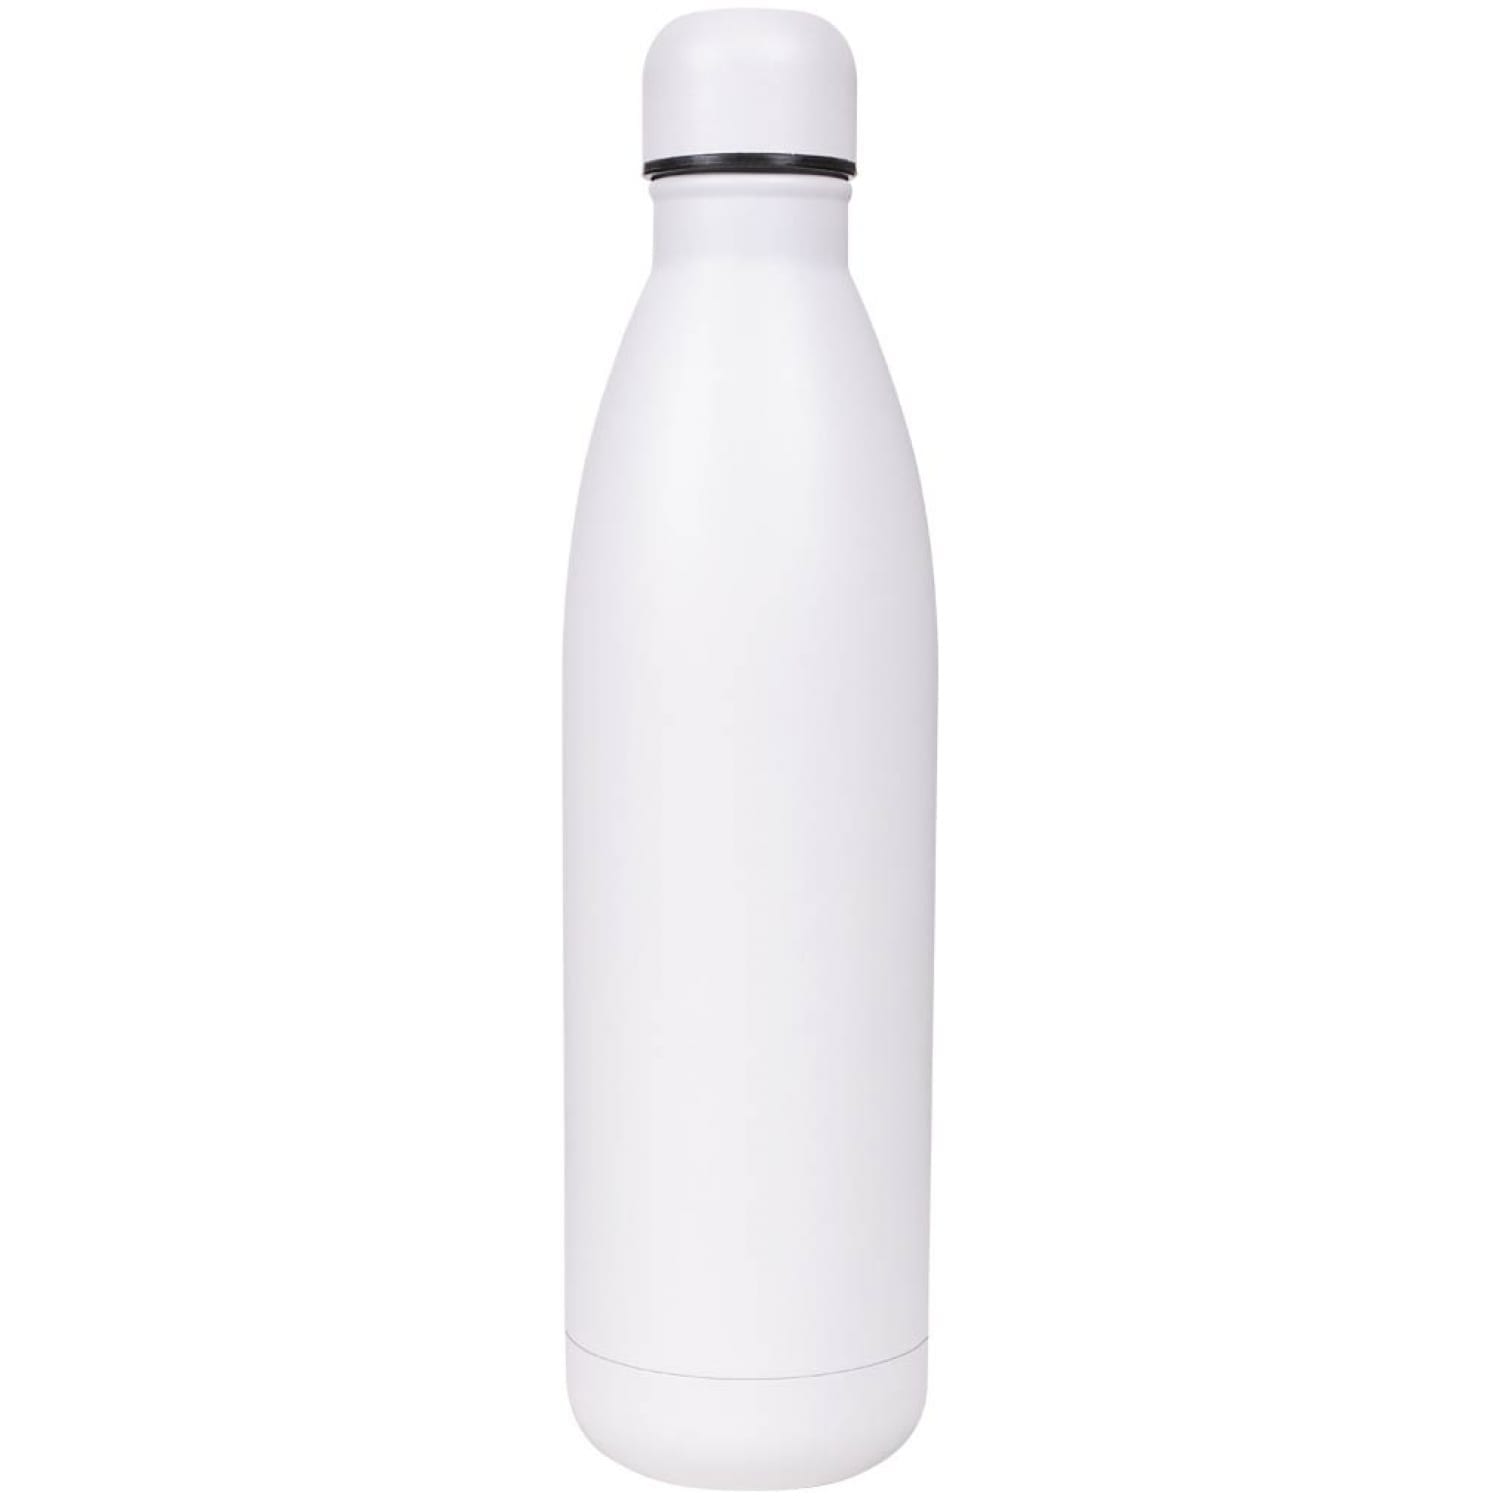 350 ml Stainless Steel Insulated Water Bottle - White – Blank